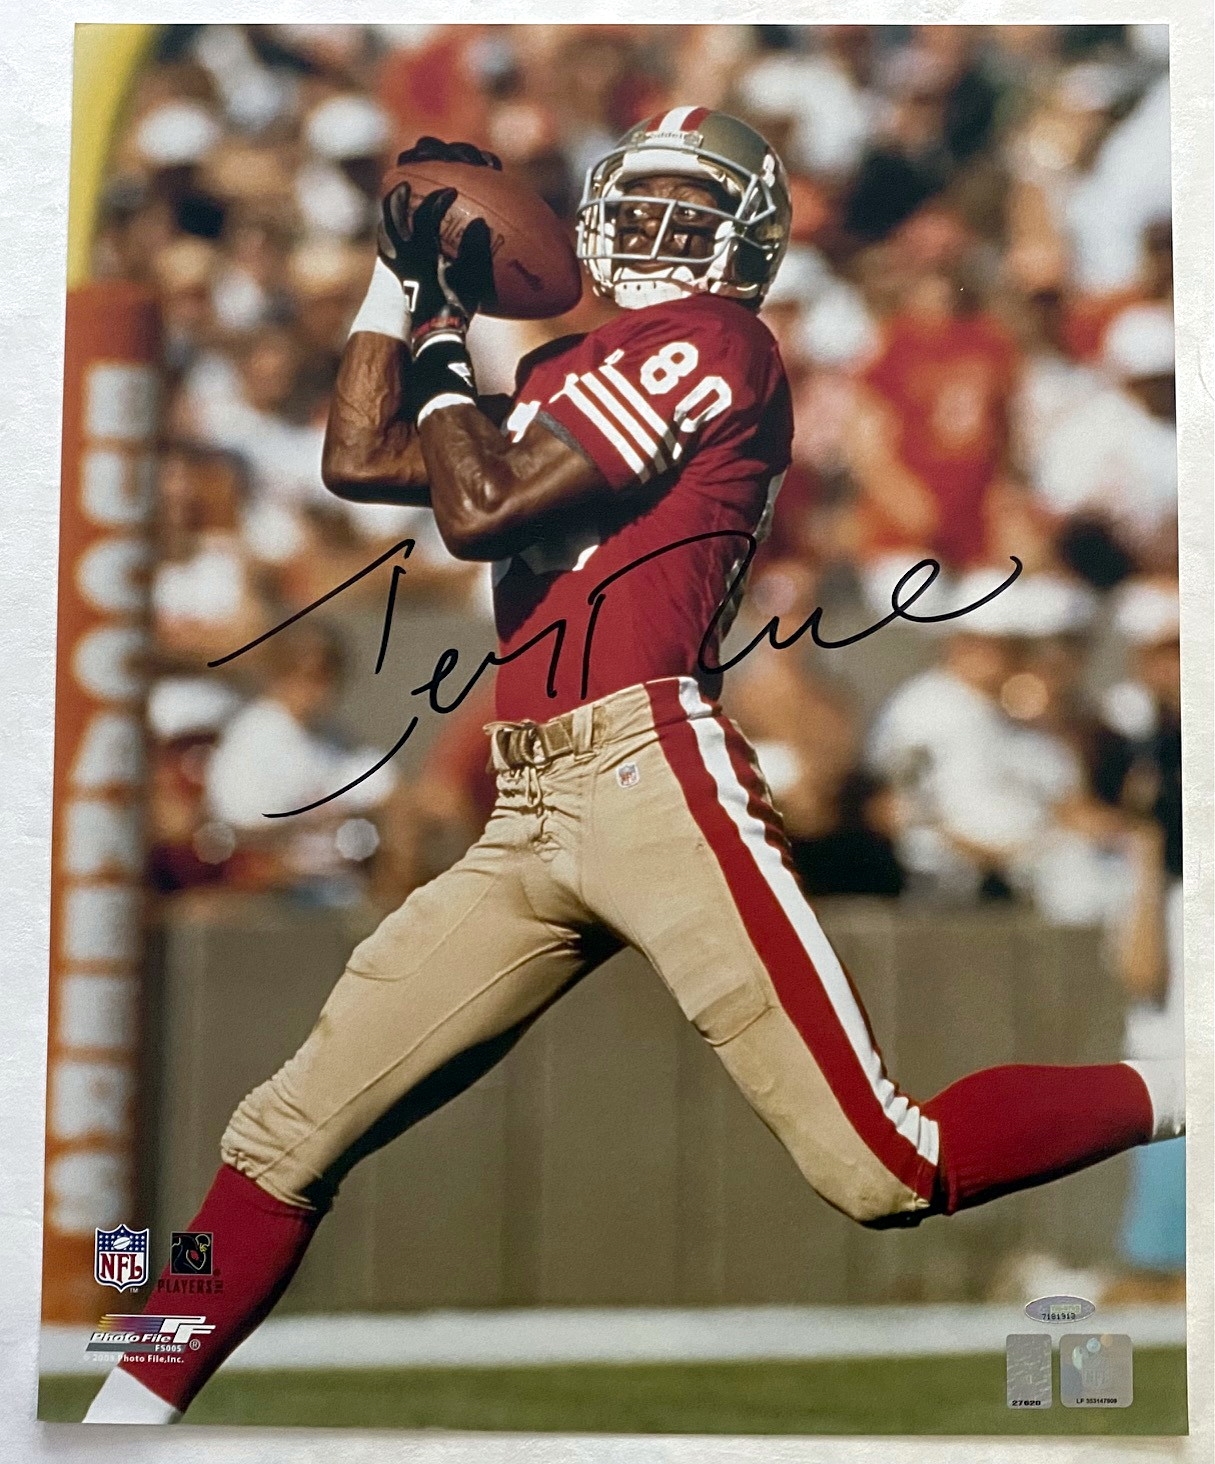 Jerry Rice Signed San Francisco 49ers Pass Completion 16x20 Photo